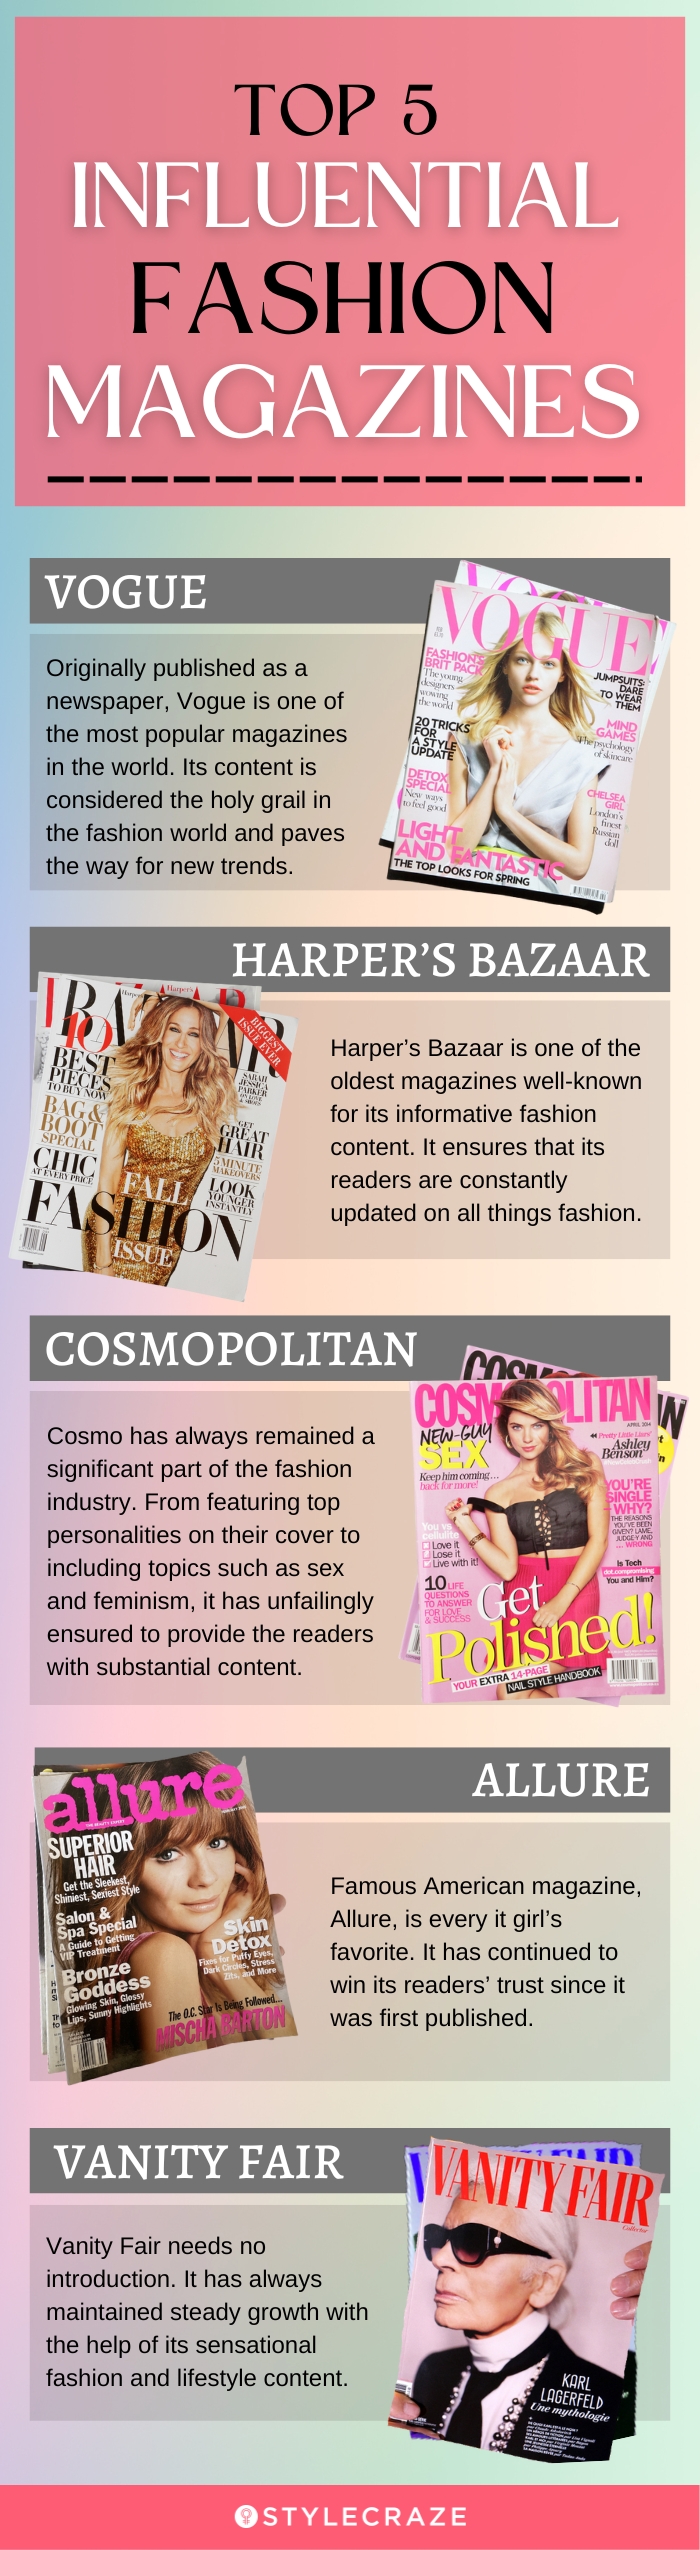 top 5 influential fashion magazines [infographic]